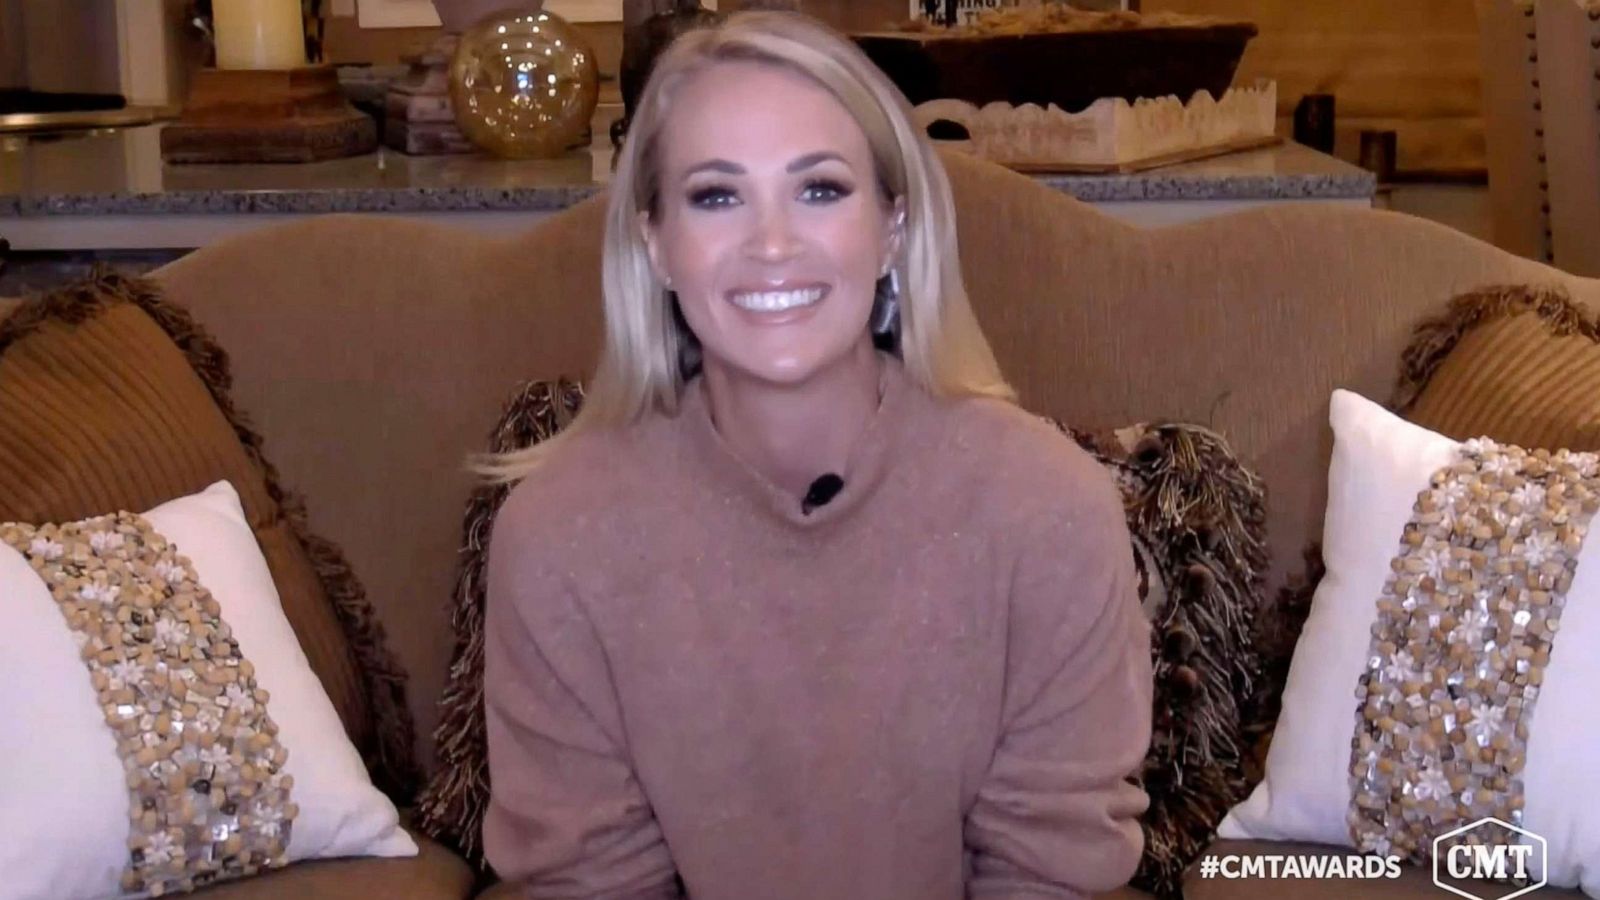 Longtime CMA Awards host Carrie Underwood stepping away in 2020